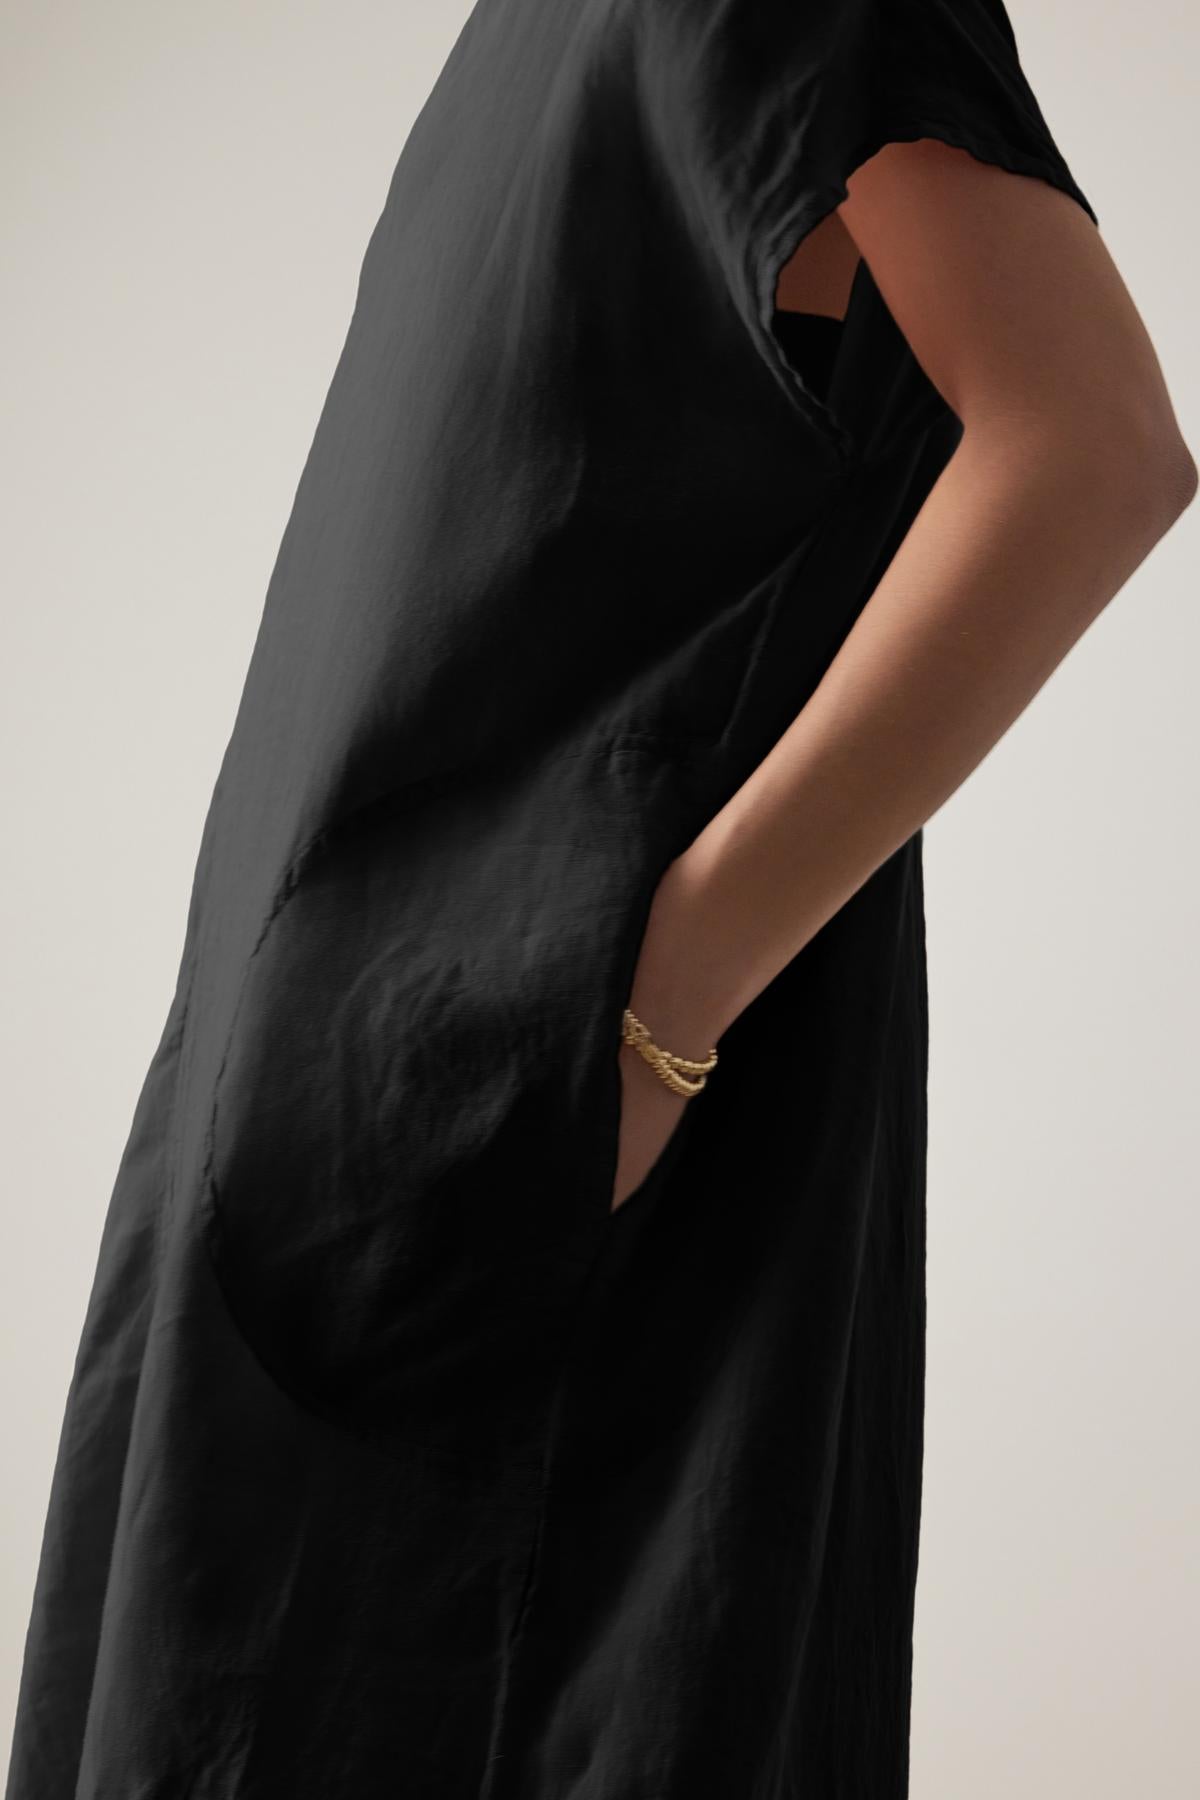 A close-up of a person wearing a Velvet by Jenny Graham black Montana linen dress with a cut-out detail at the elbow and a gold bracelet on the wrist.-36863315378369